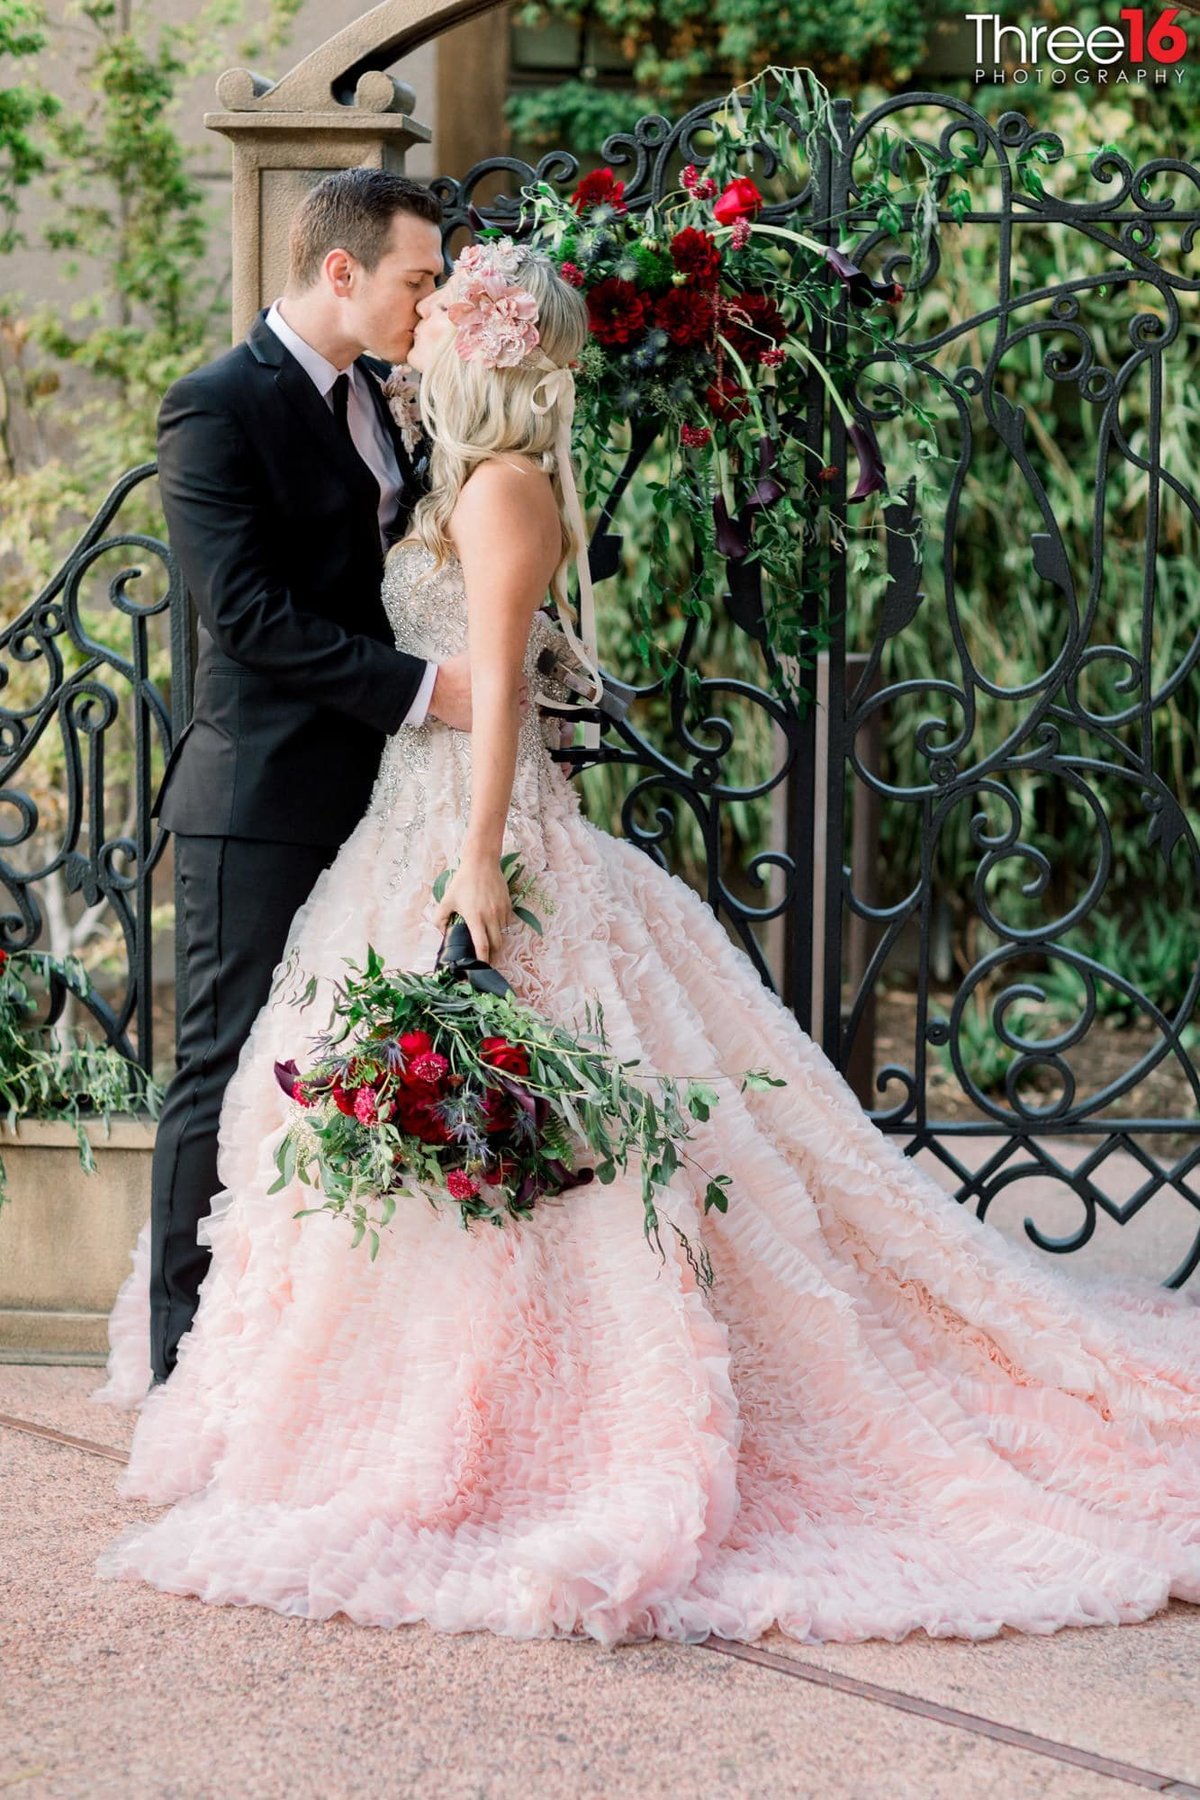 Bride and Groom share a tender kiss outside during a photo shoot